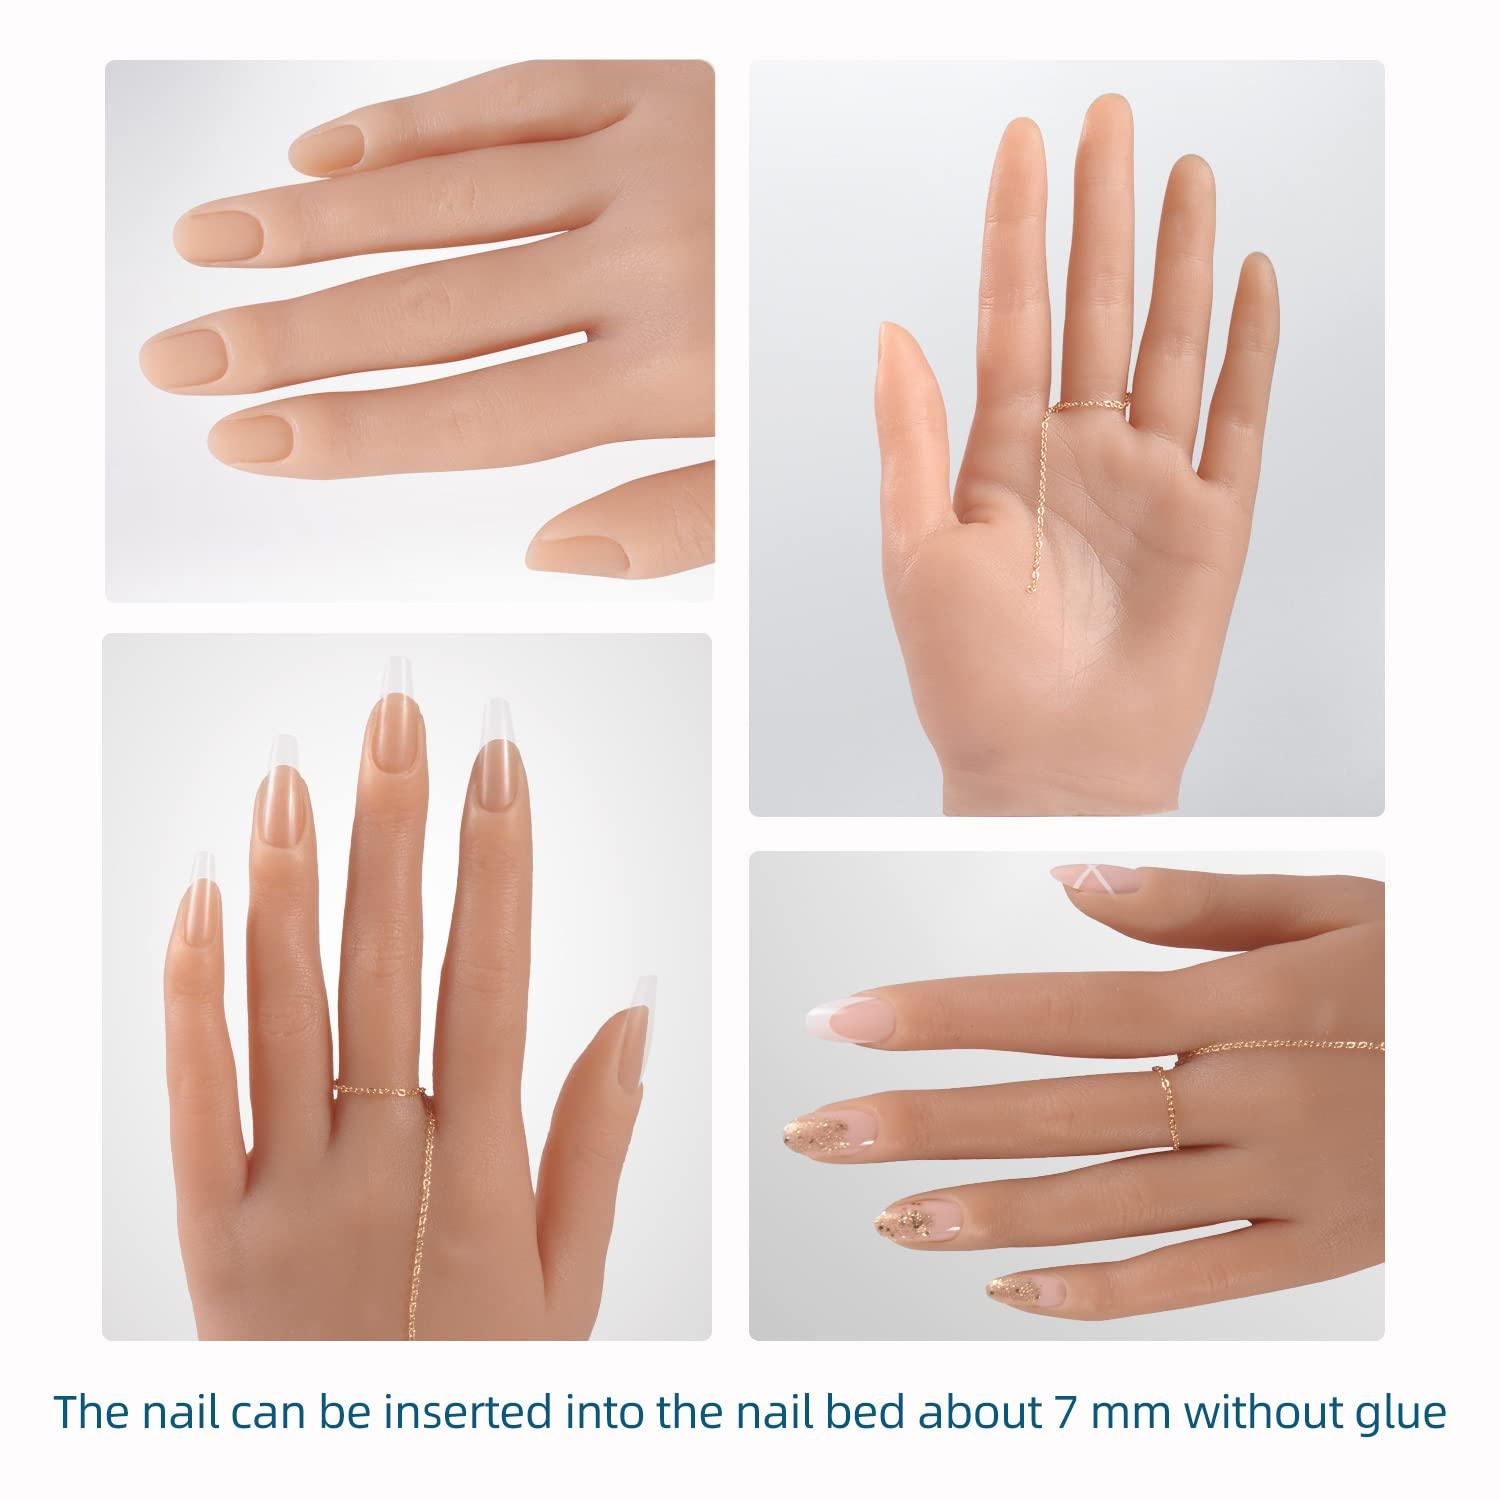 Practice Hand for Acrylic Nails, Fake Hand for Nails Practice, Flexible  Bendable Mannequin Hand, Set of